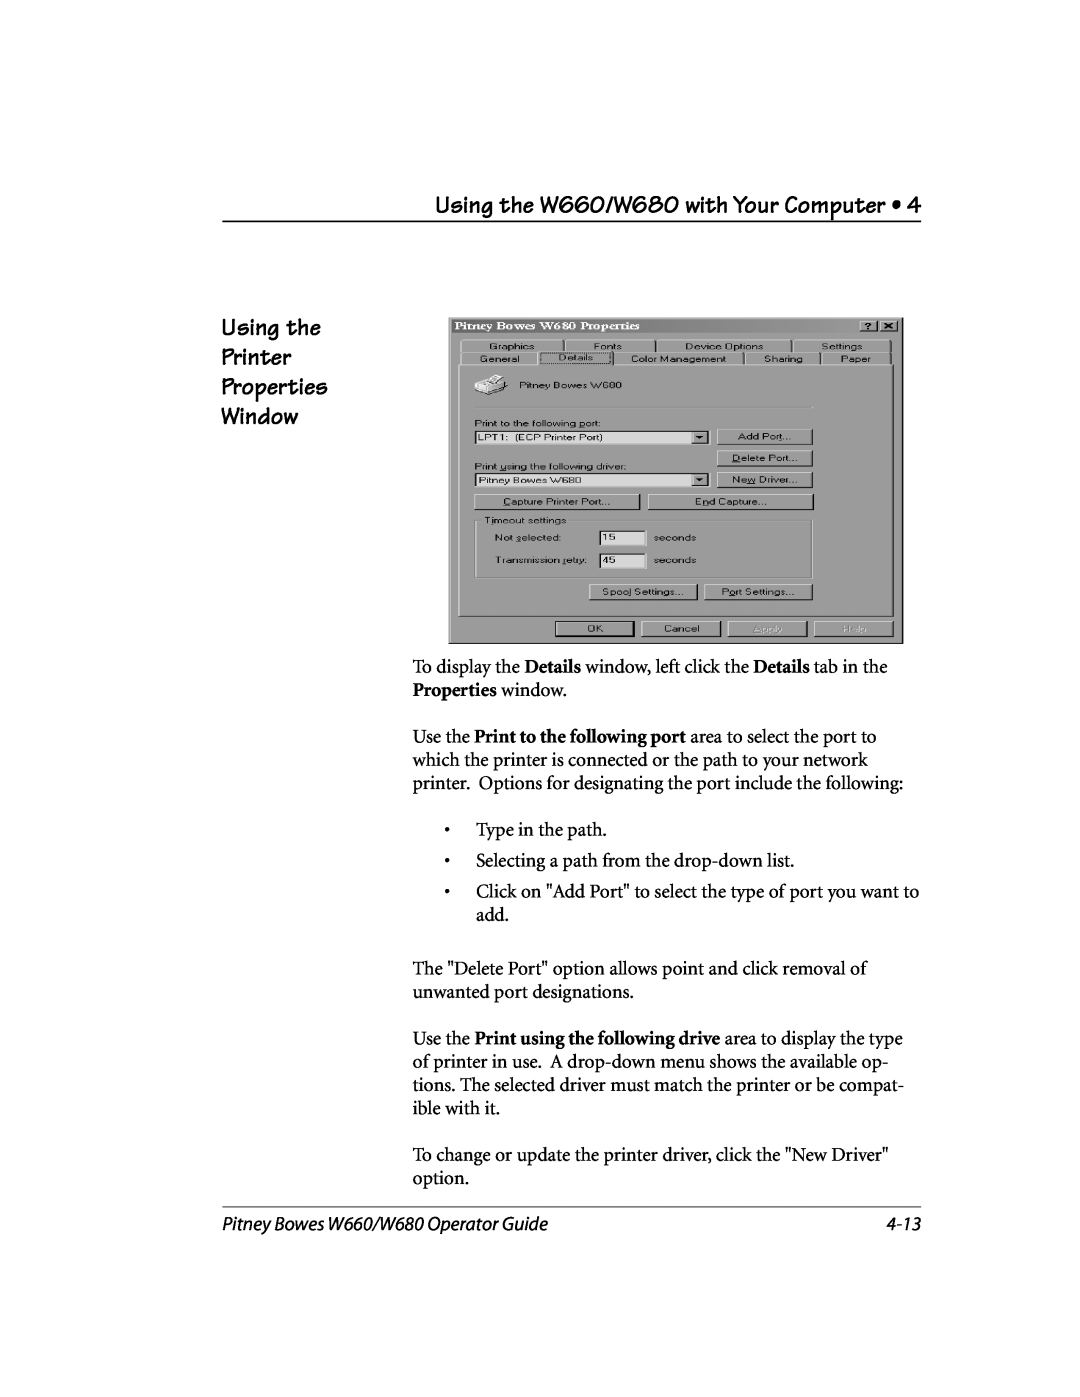 Pitney Bowes manual Using the W660/W680 with Your Computer Using the Printer Properties, Window, Properties window, 4-13 